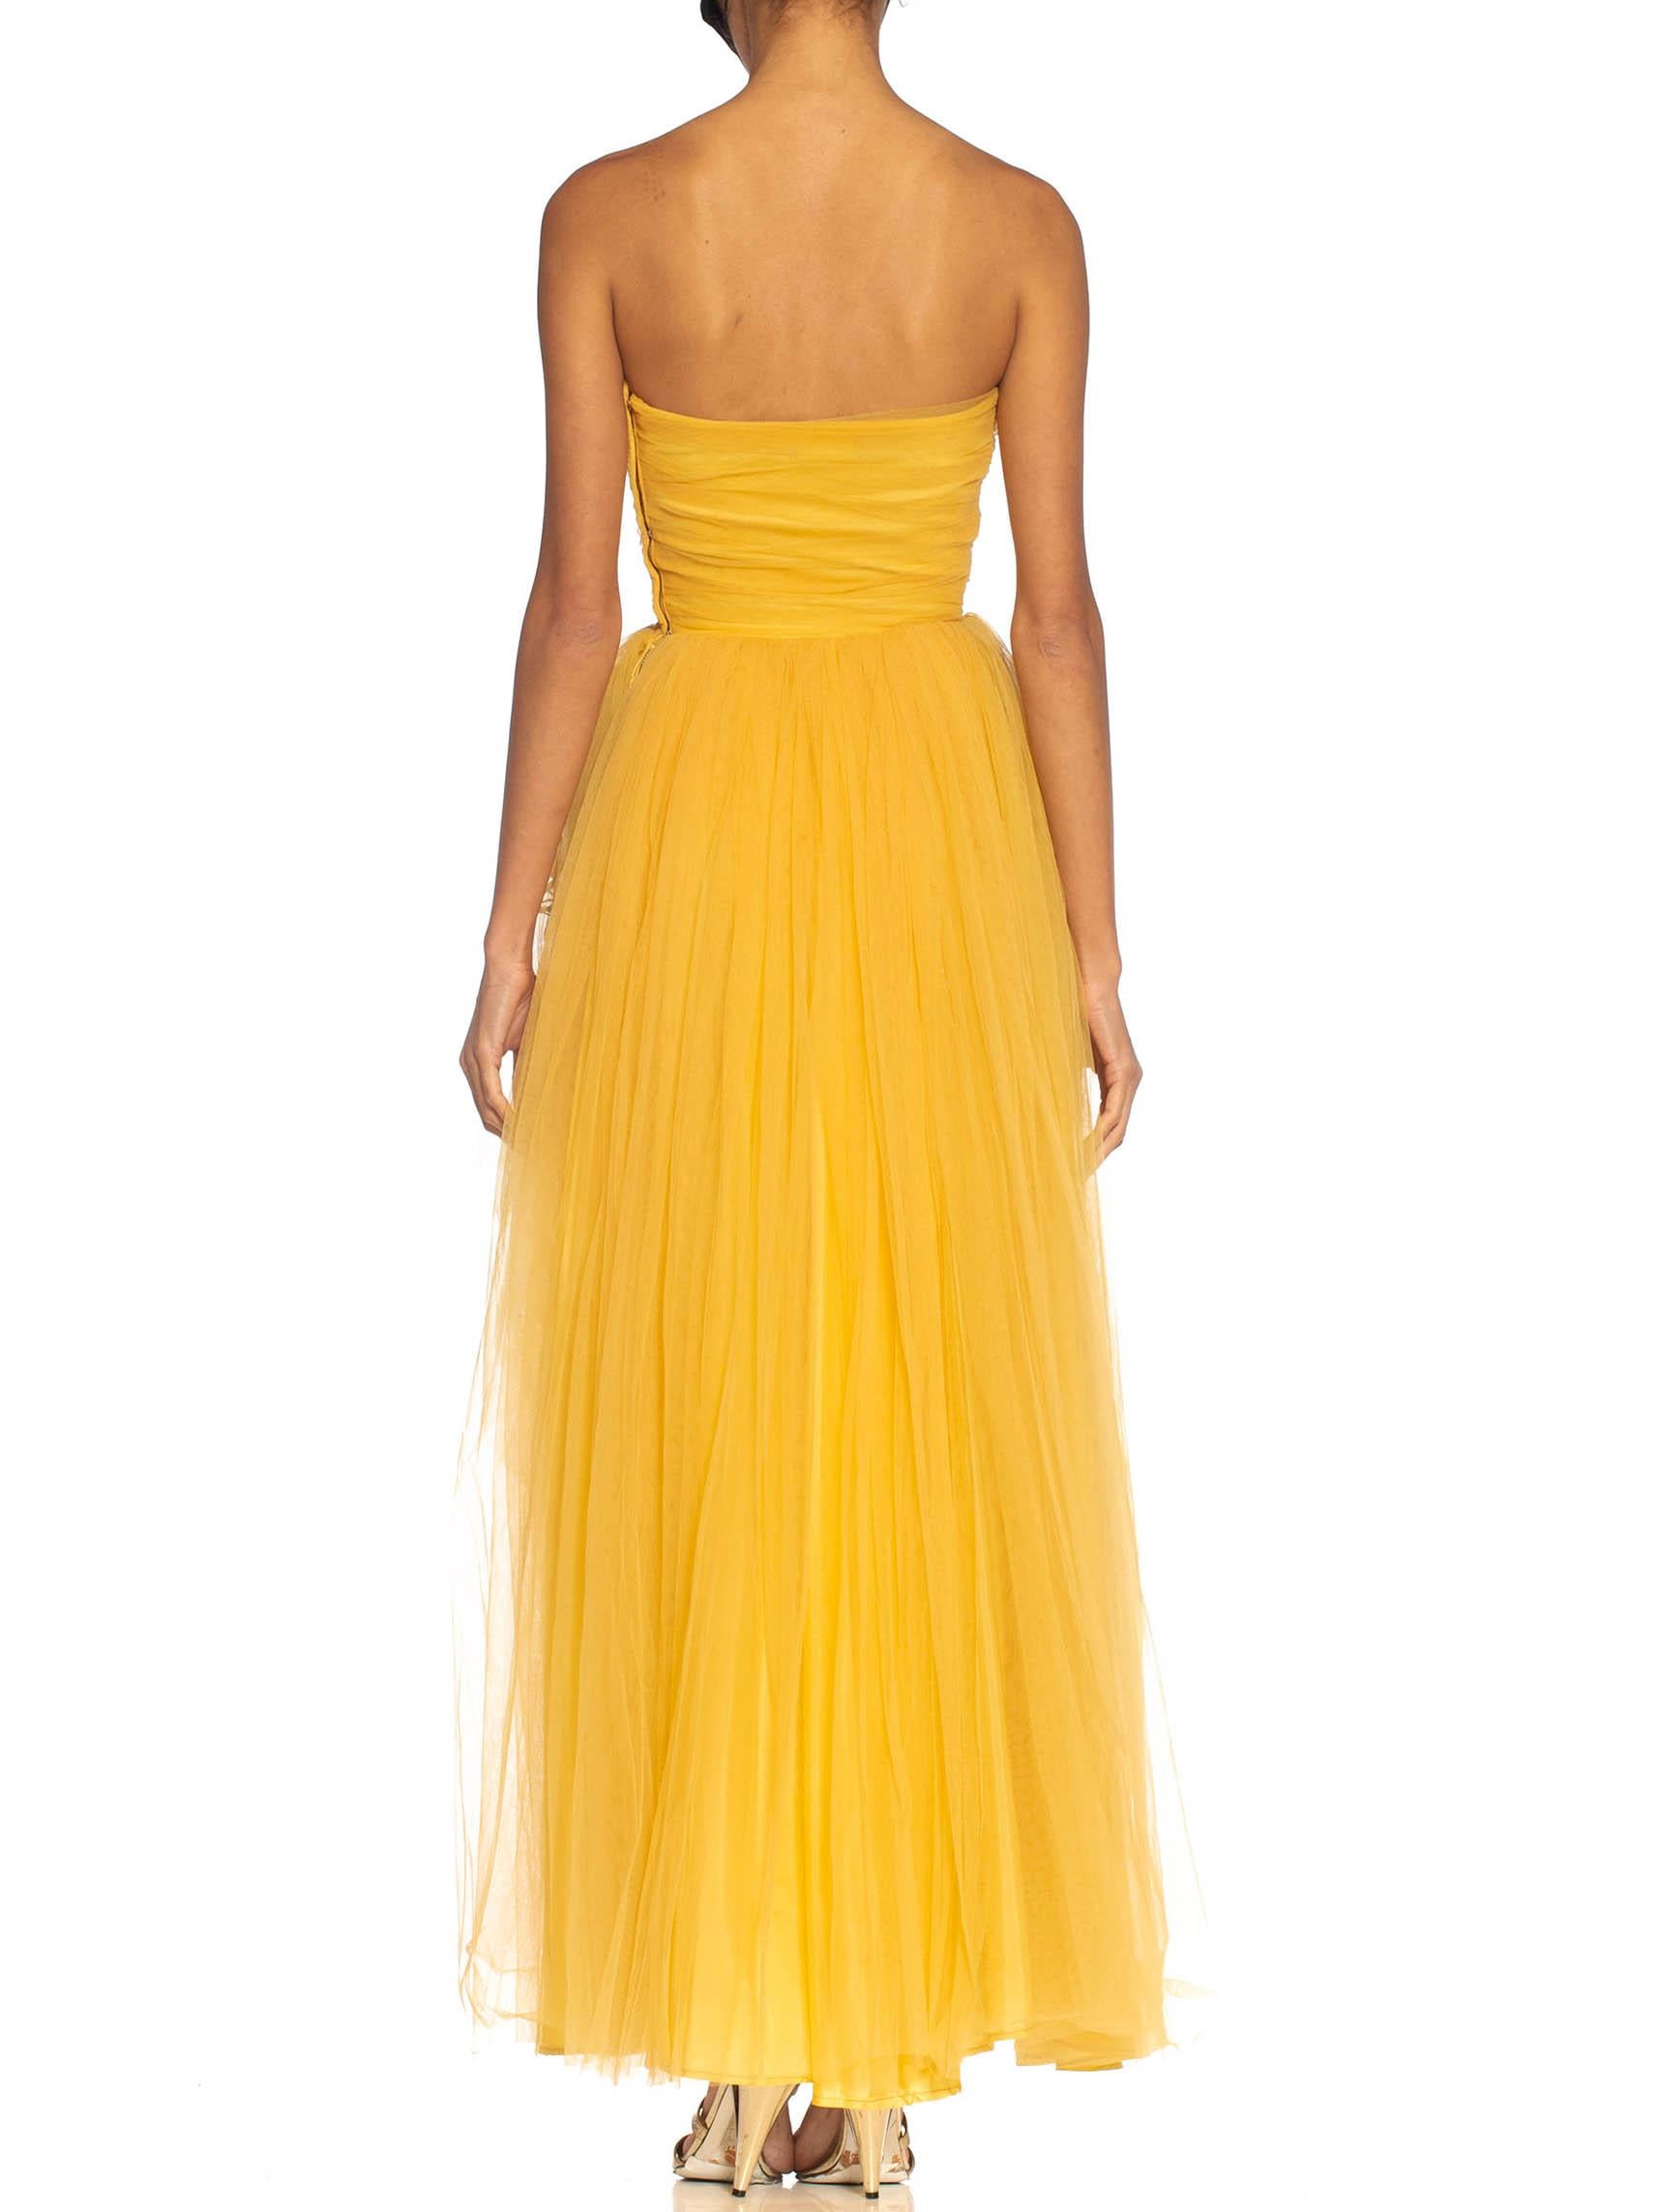 1950S Golden Yellow Rayon & Nylon Tulle Strapless Gown With Flowers For Sale 5